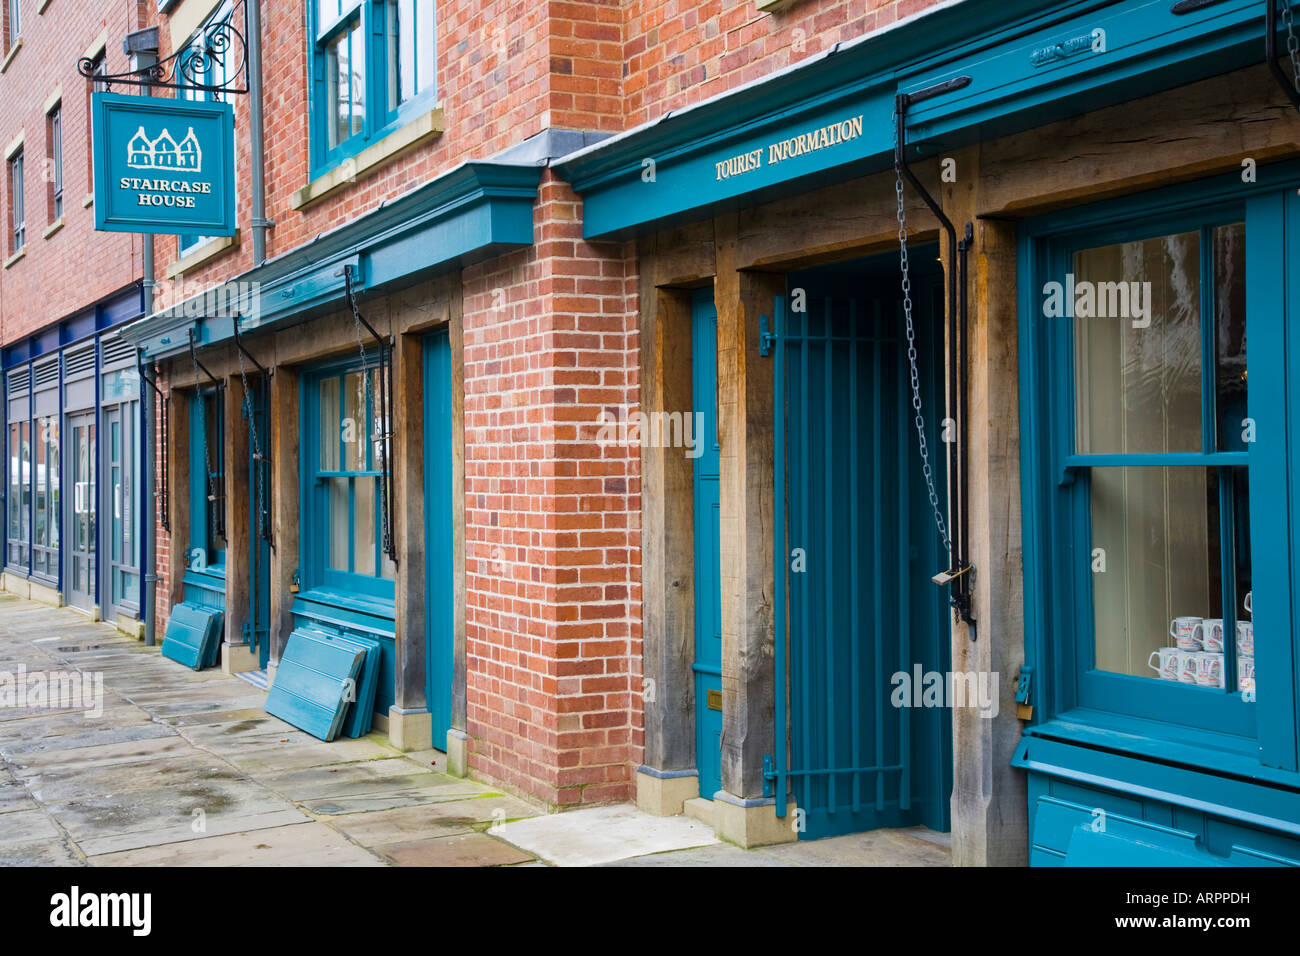 Tourist Information and Staircase House. Stockport Market, Stockport, Greater Manchester, United Kingdom. Stock Photo